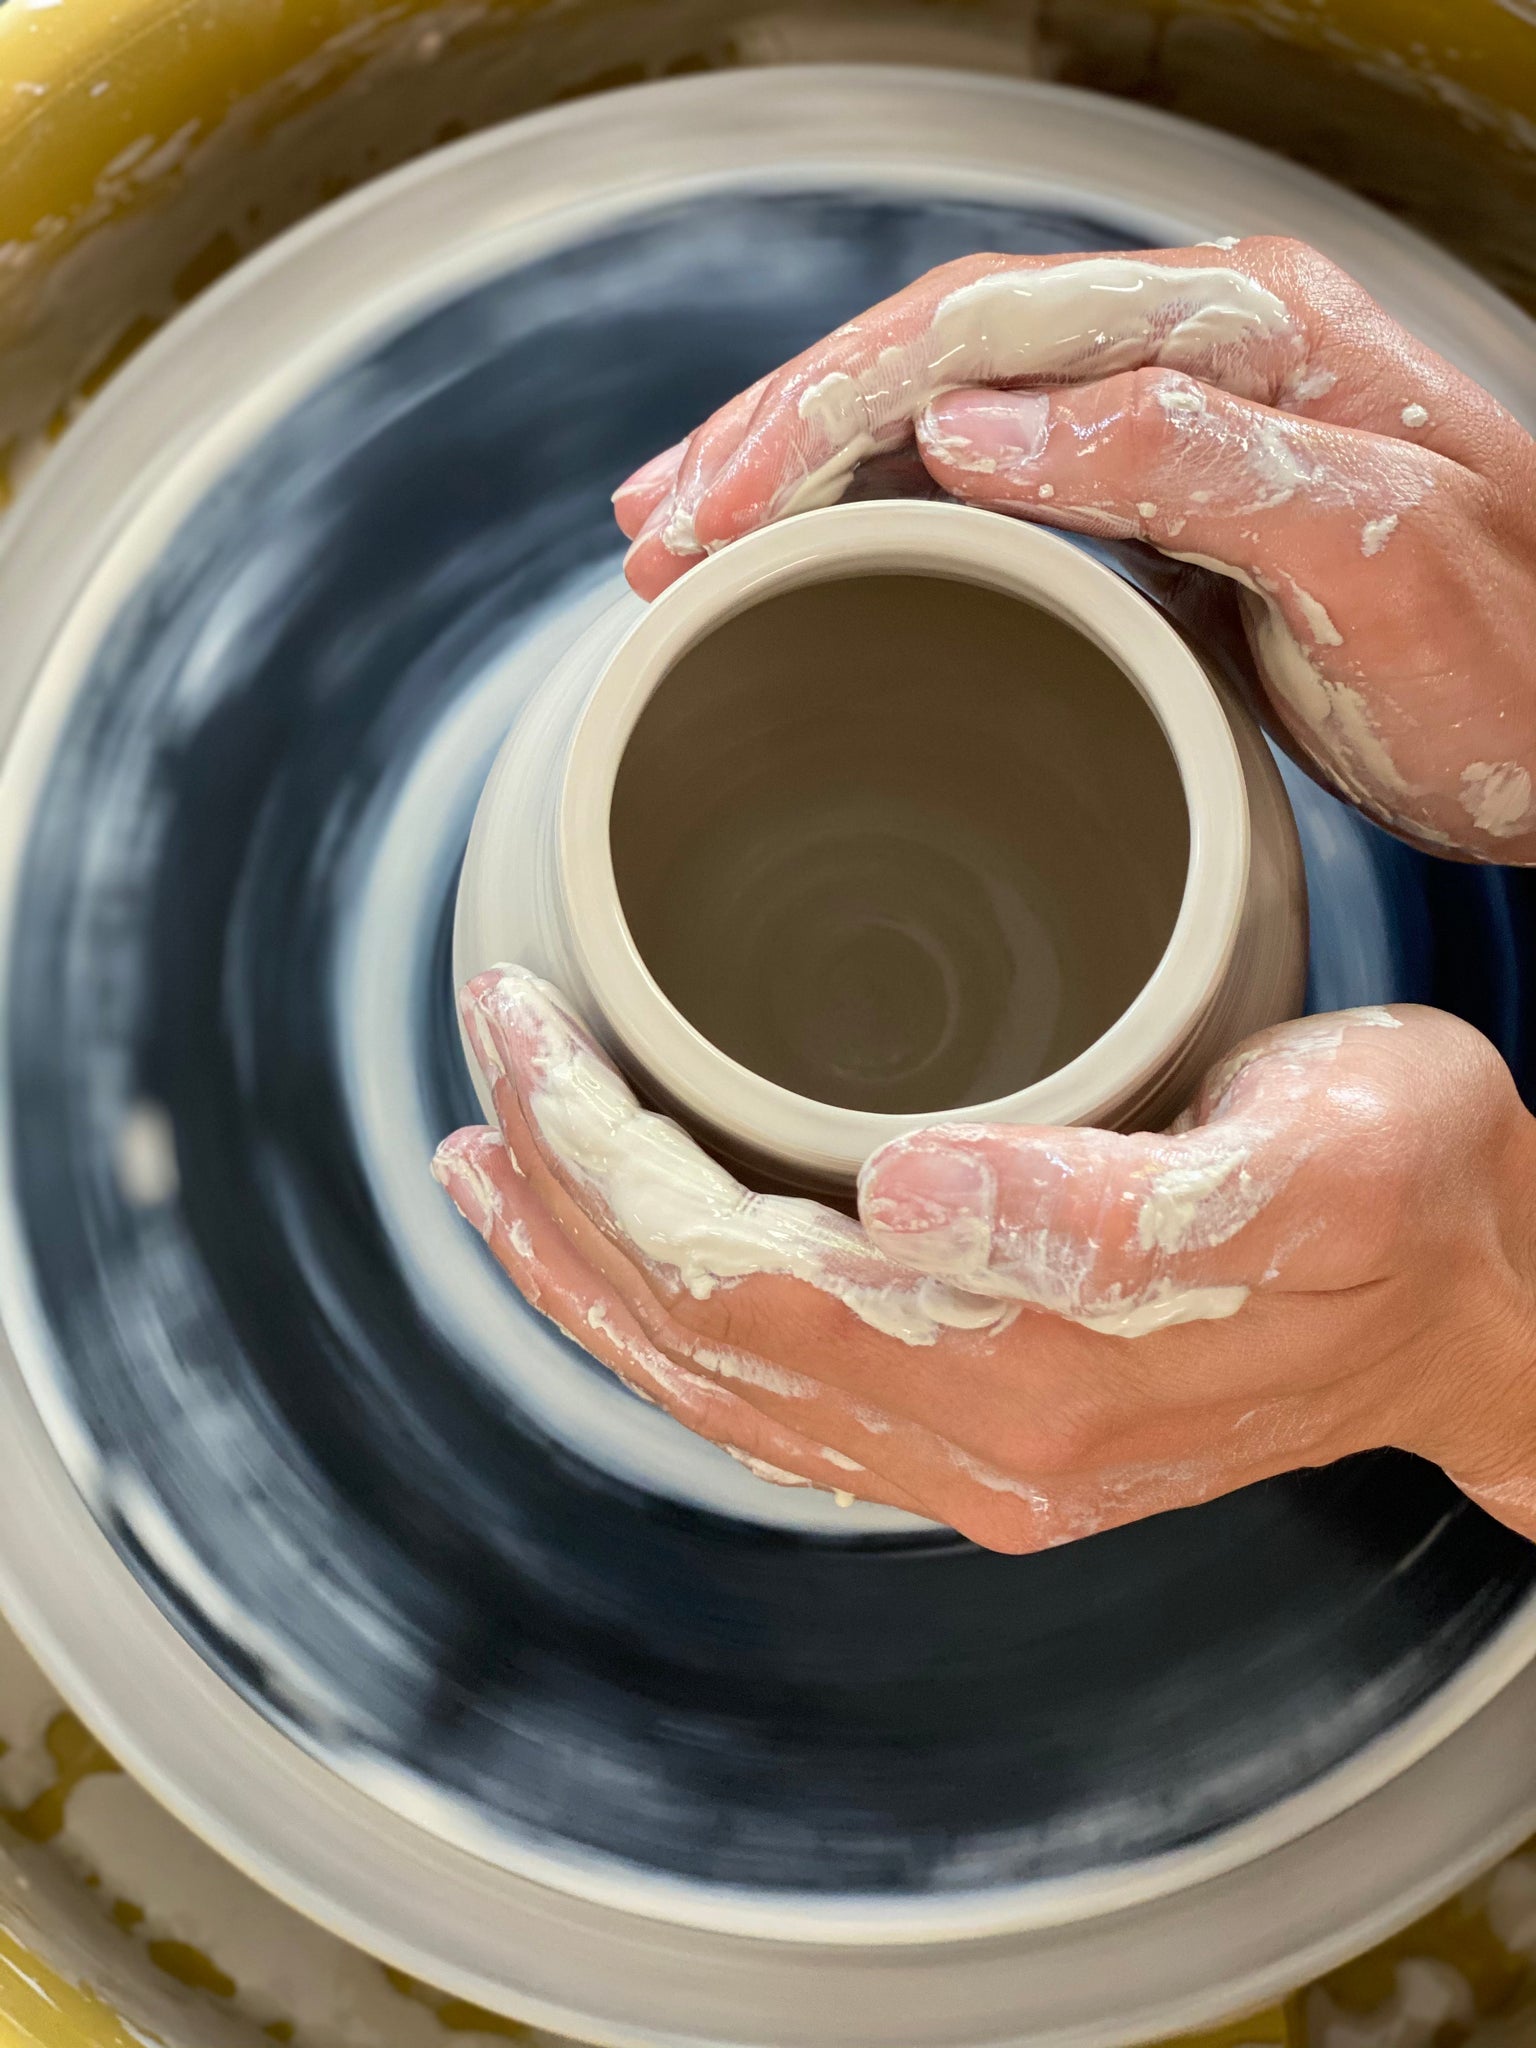 Wheel Throwing Clay Date - Sunday 12/17/23, 10 AM - 12 PM